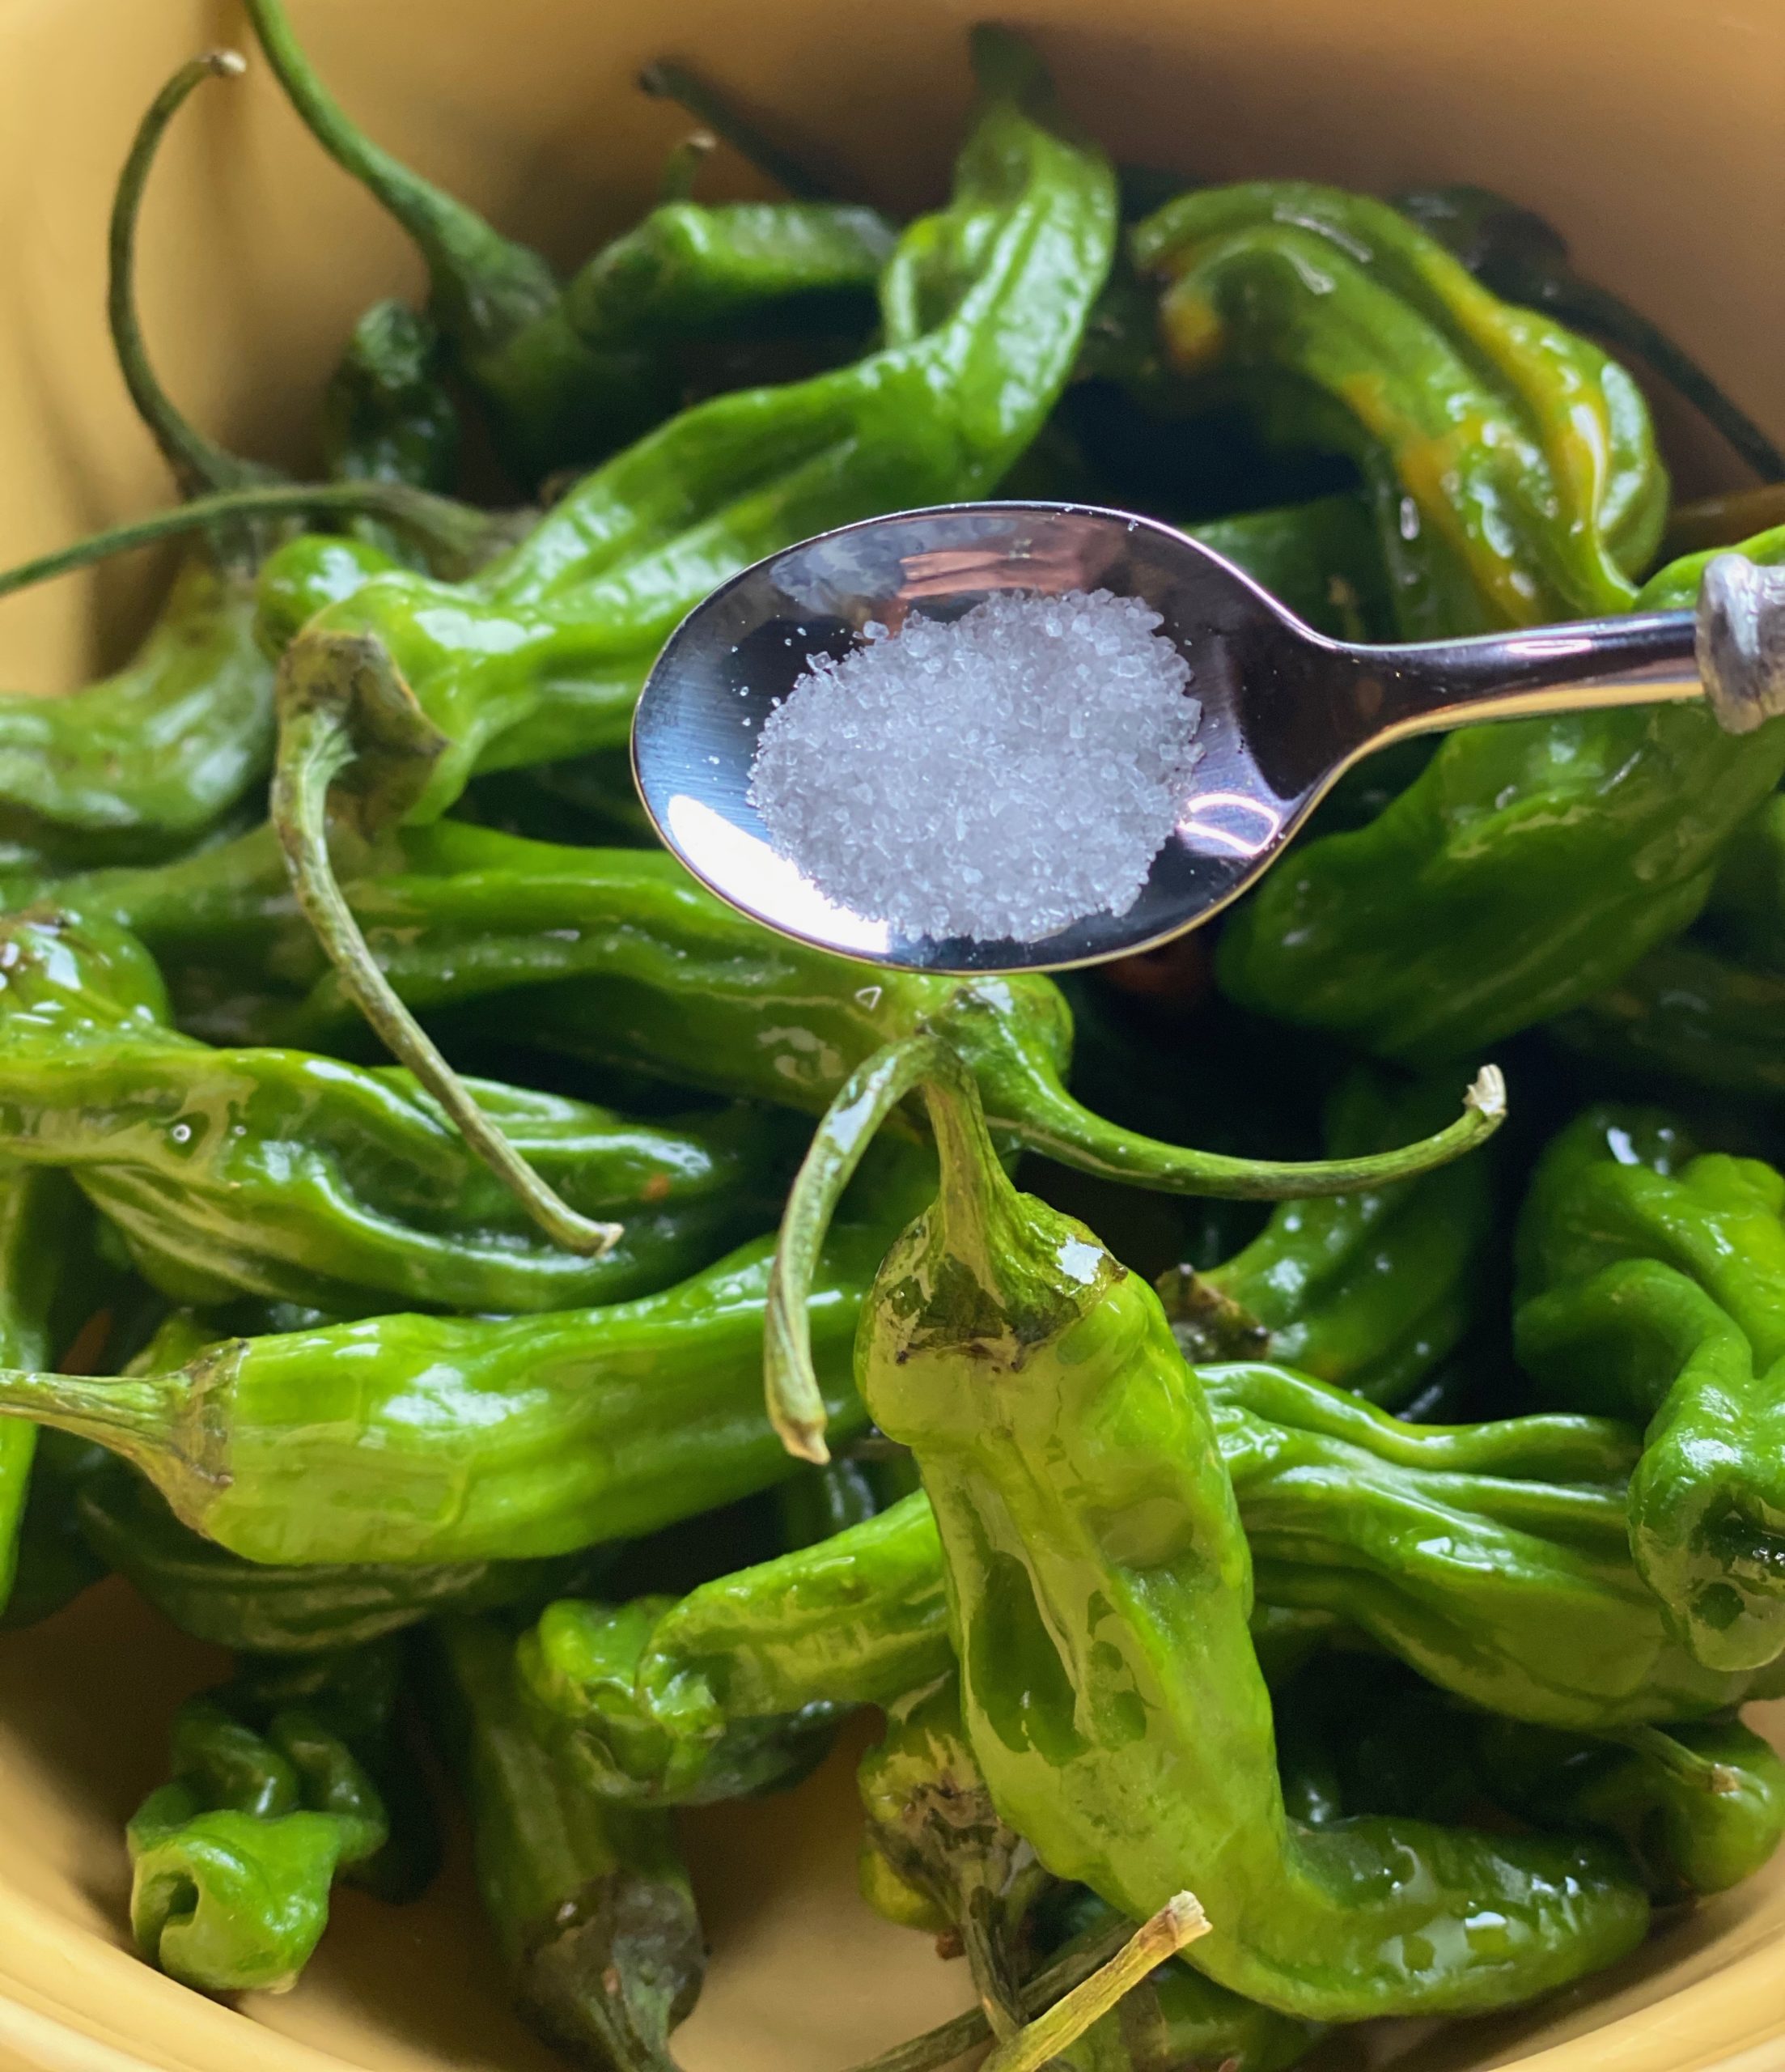 A spoon with salt being poured onto peppers coated in oil